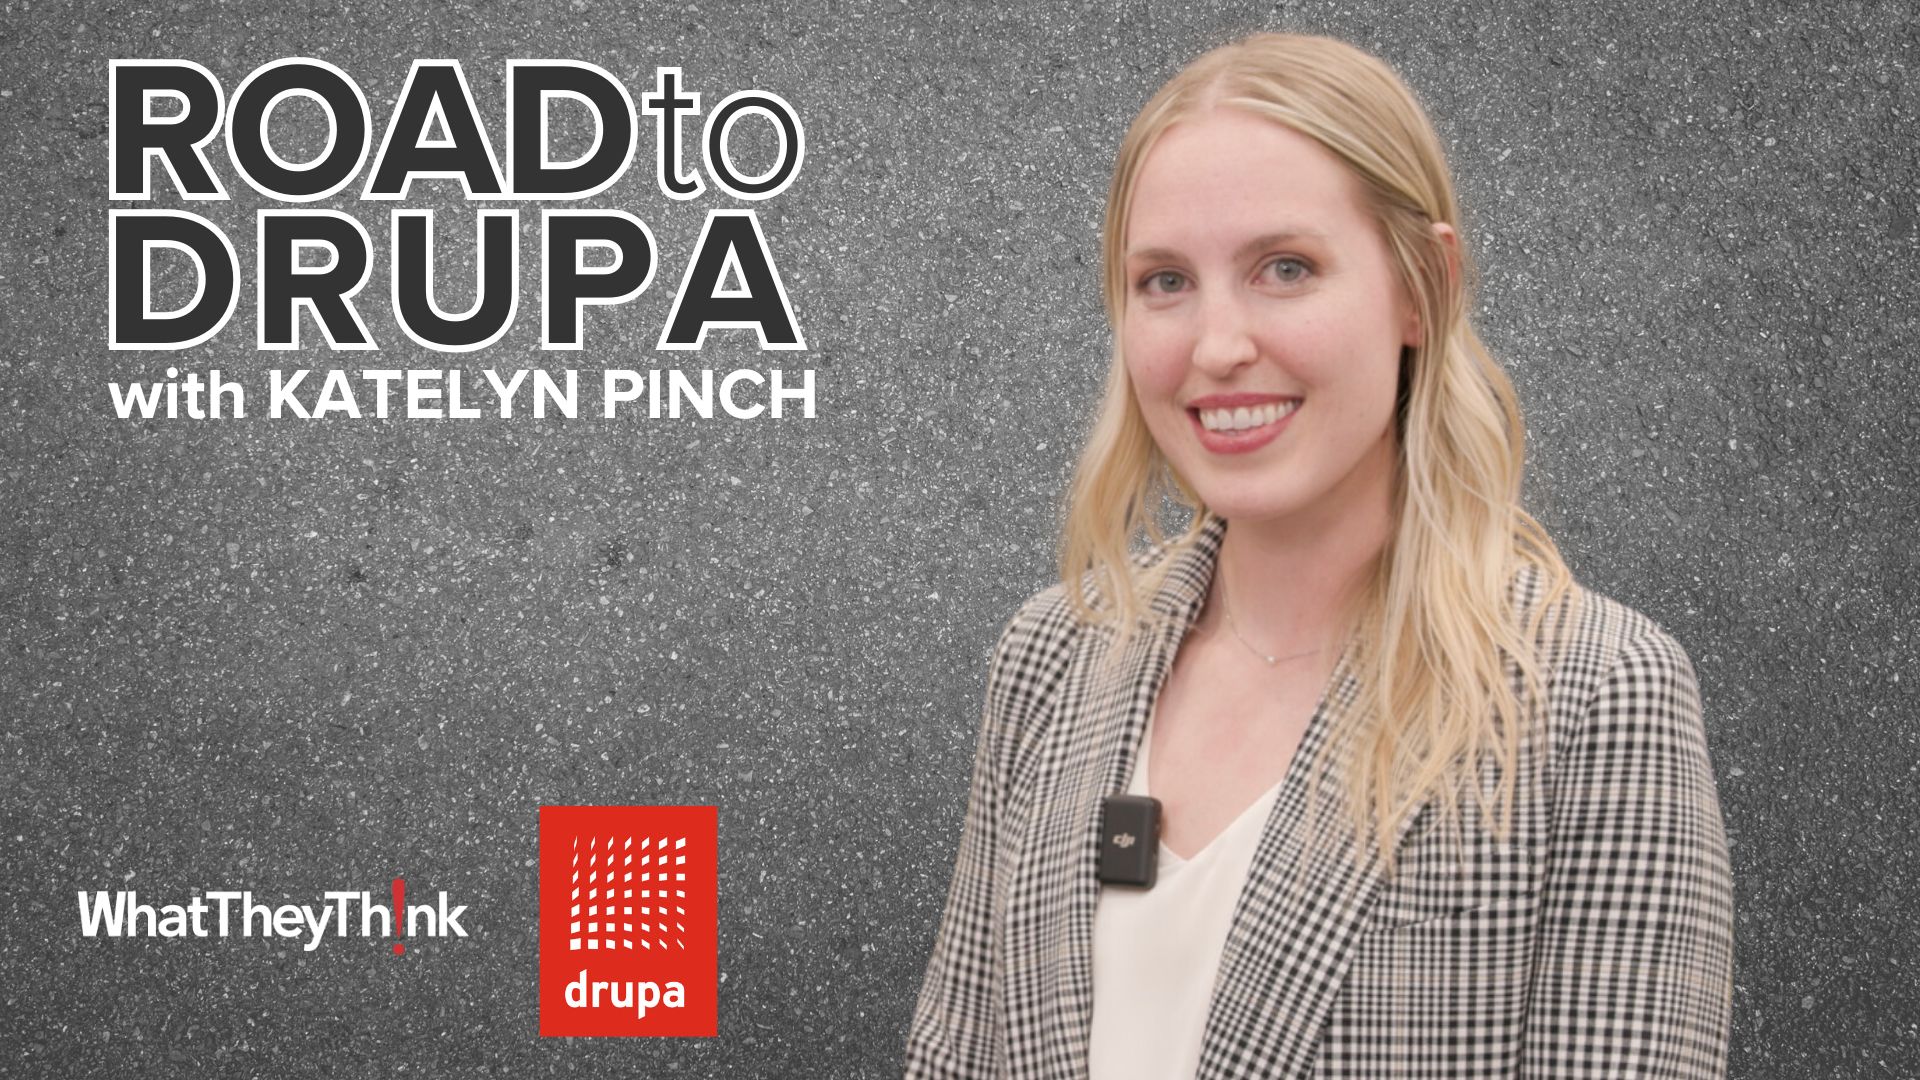 Video preview: Road to drupa: Standard Finishing's Katelyn Pinch